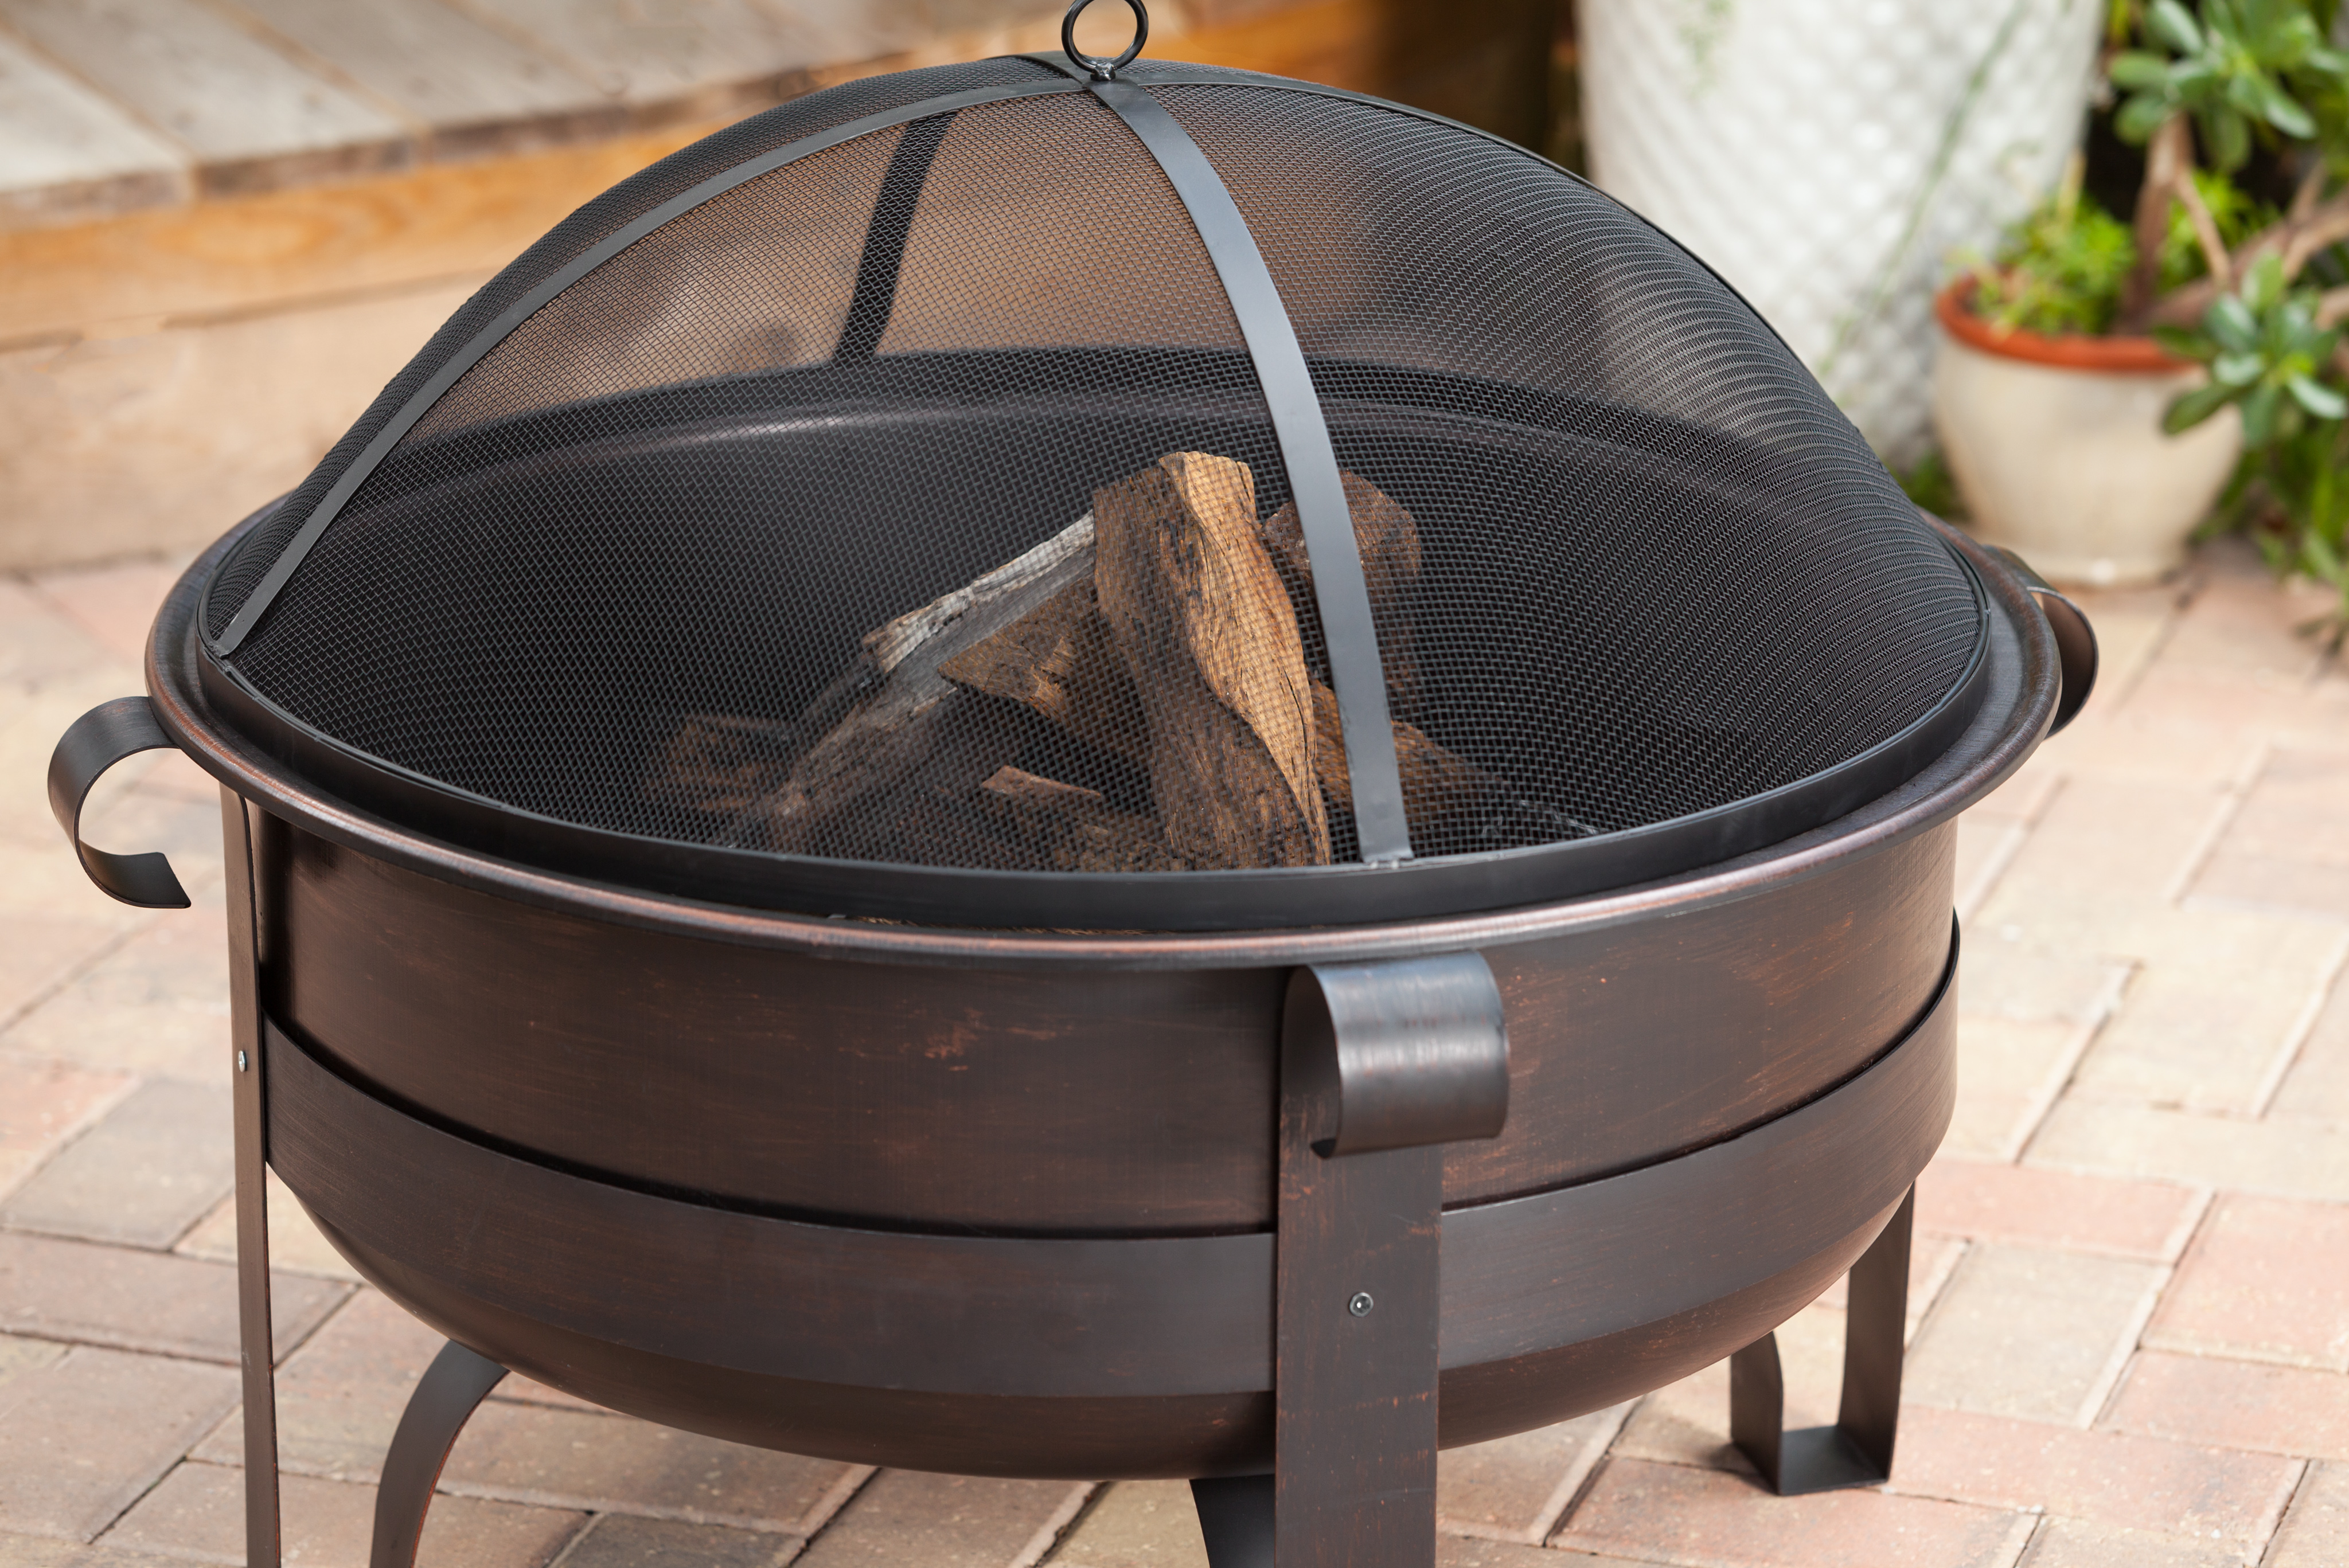 Cornell Wood Burning Fire Pit Well, Red Ember Brockton Steel Cauldron Fire Pit